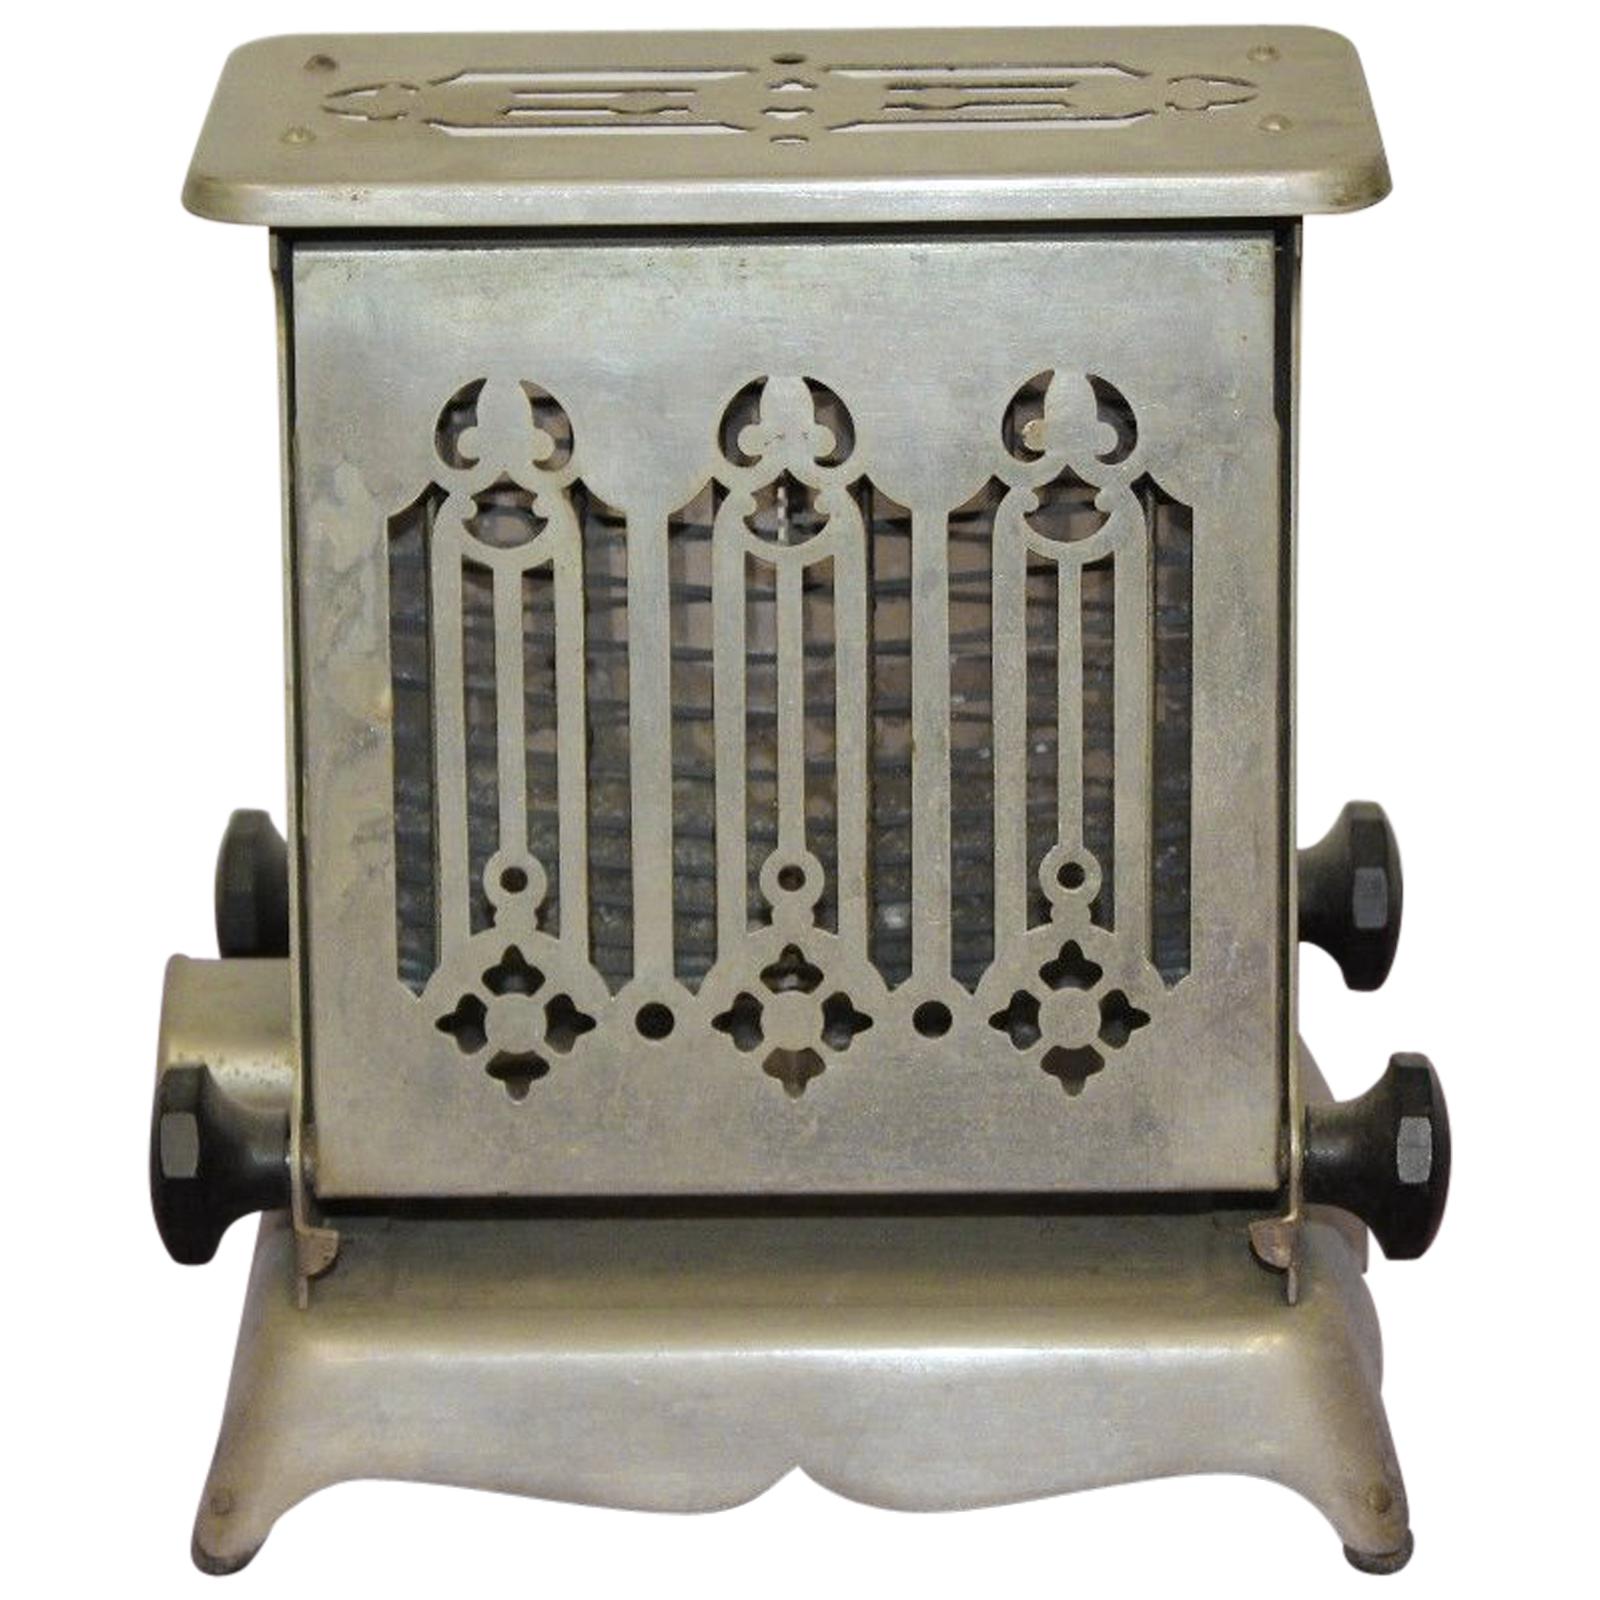 Early 1900s Hotpoint Electric Vintage Toaster